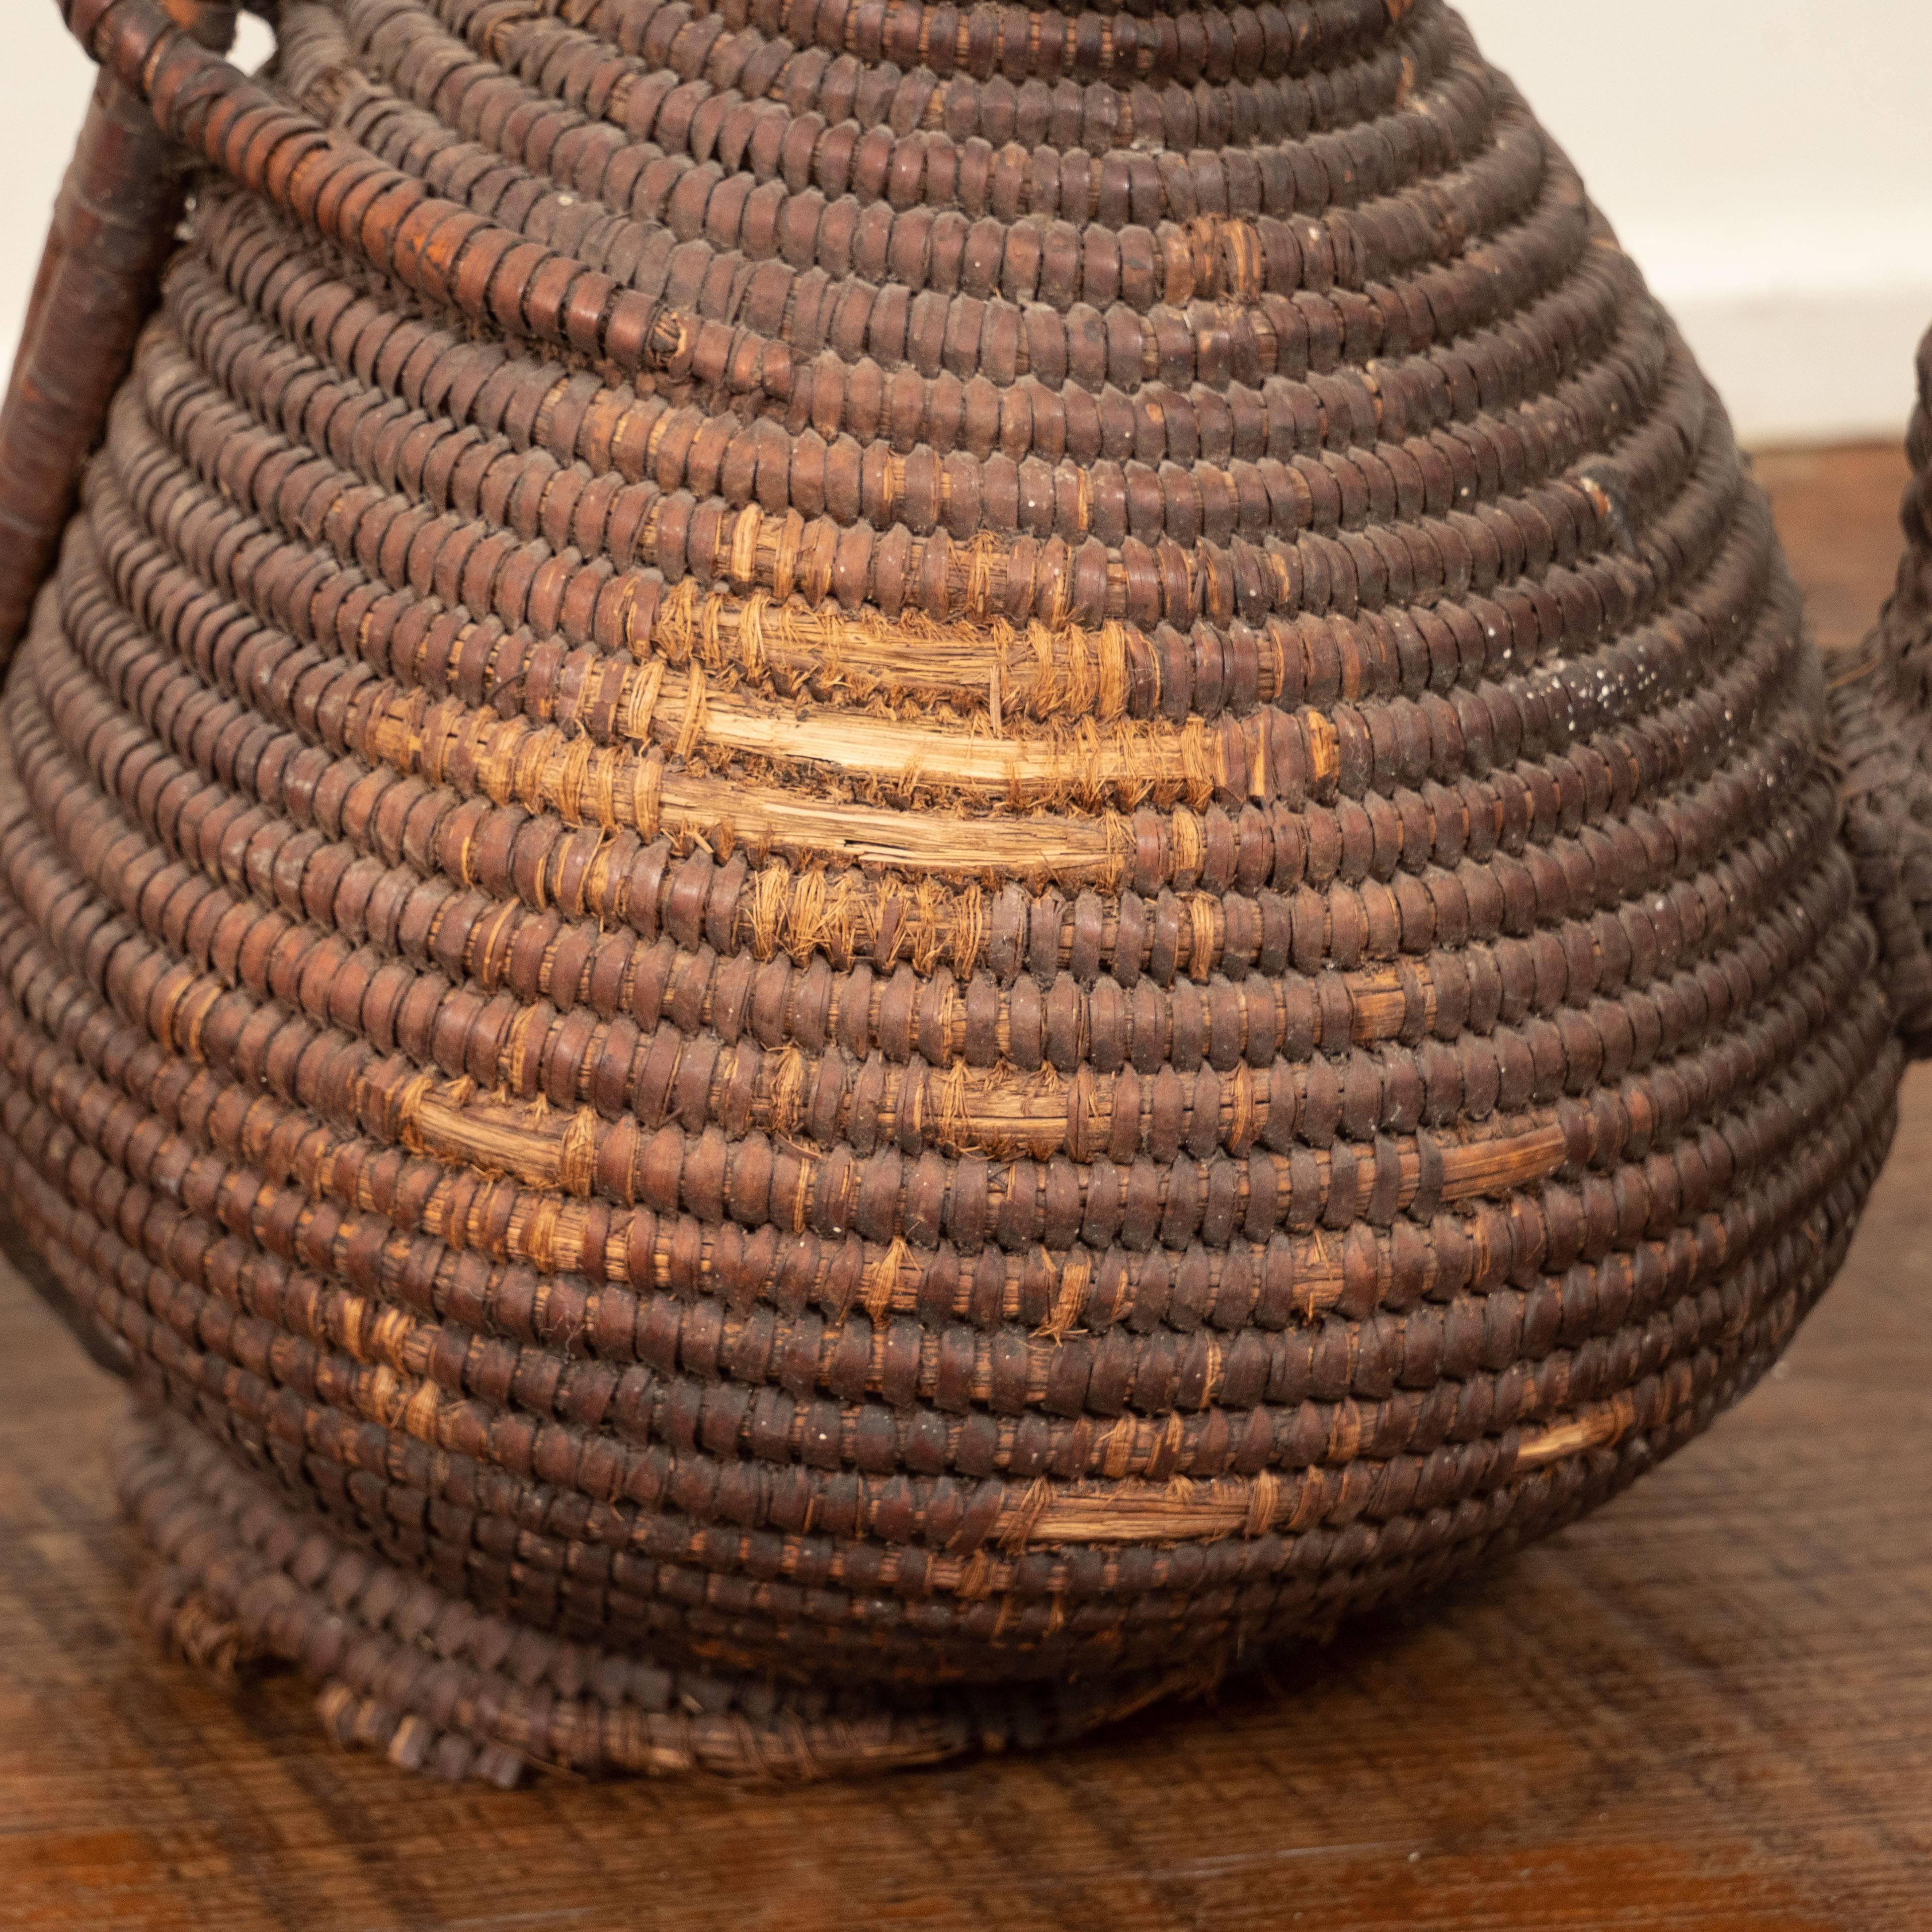 19th Century Woven Tea Basket, probably African 3